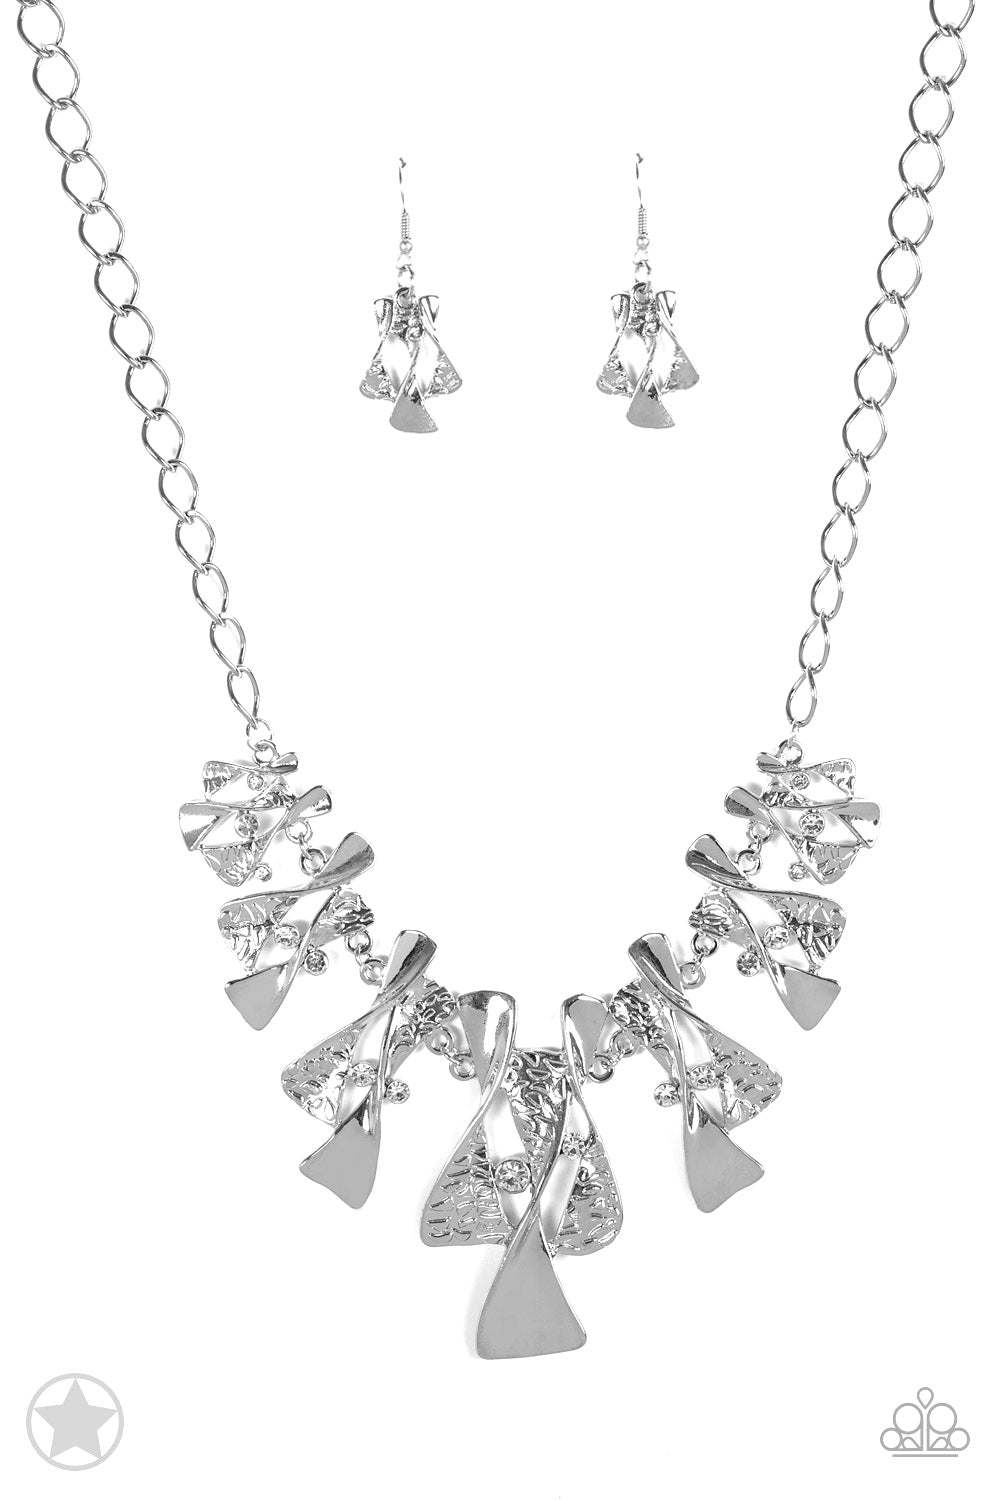 The Sands of Time - Silver Paparazzi Blockbuster Necklace